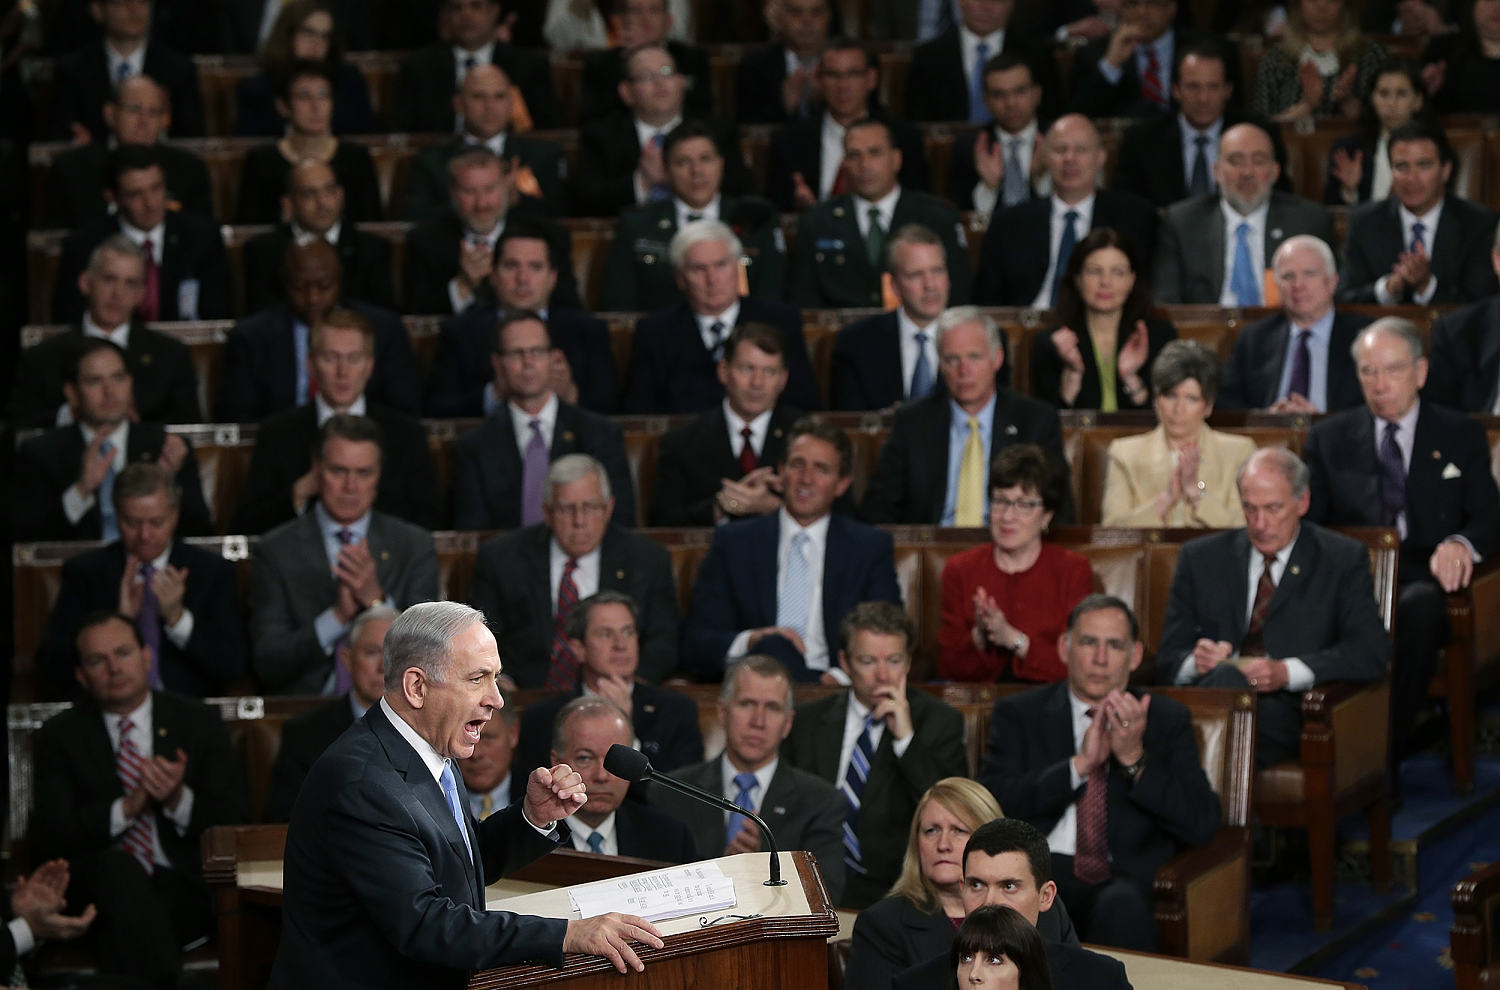 I’m the youngest Jewish member of Congress. Here’s why I’m not attending Netanyahu’s address.